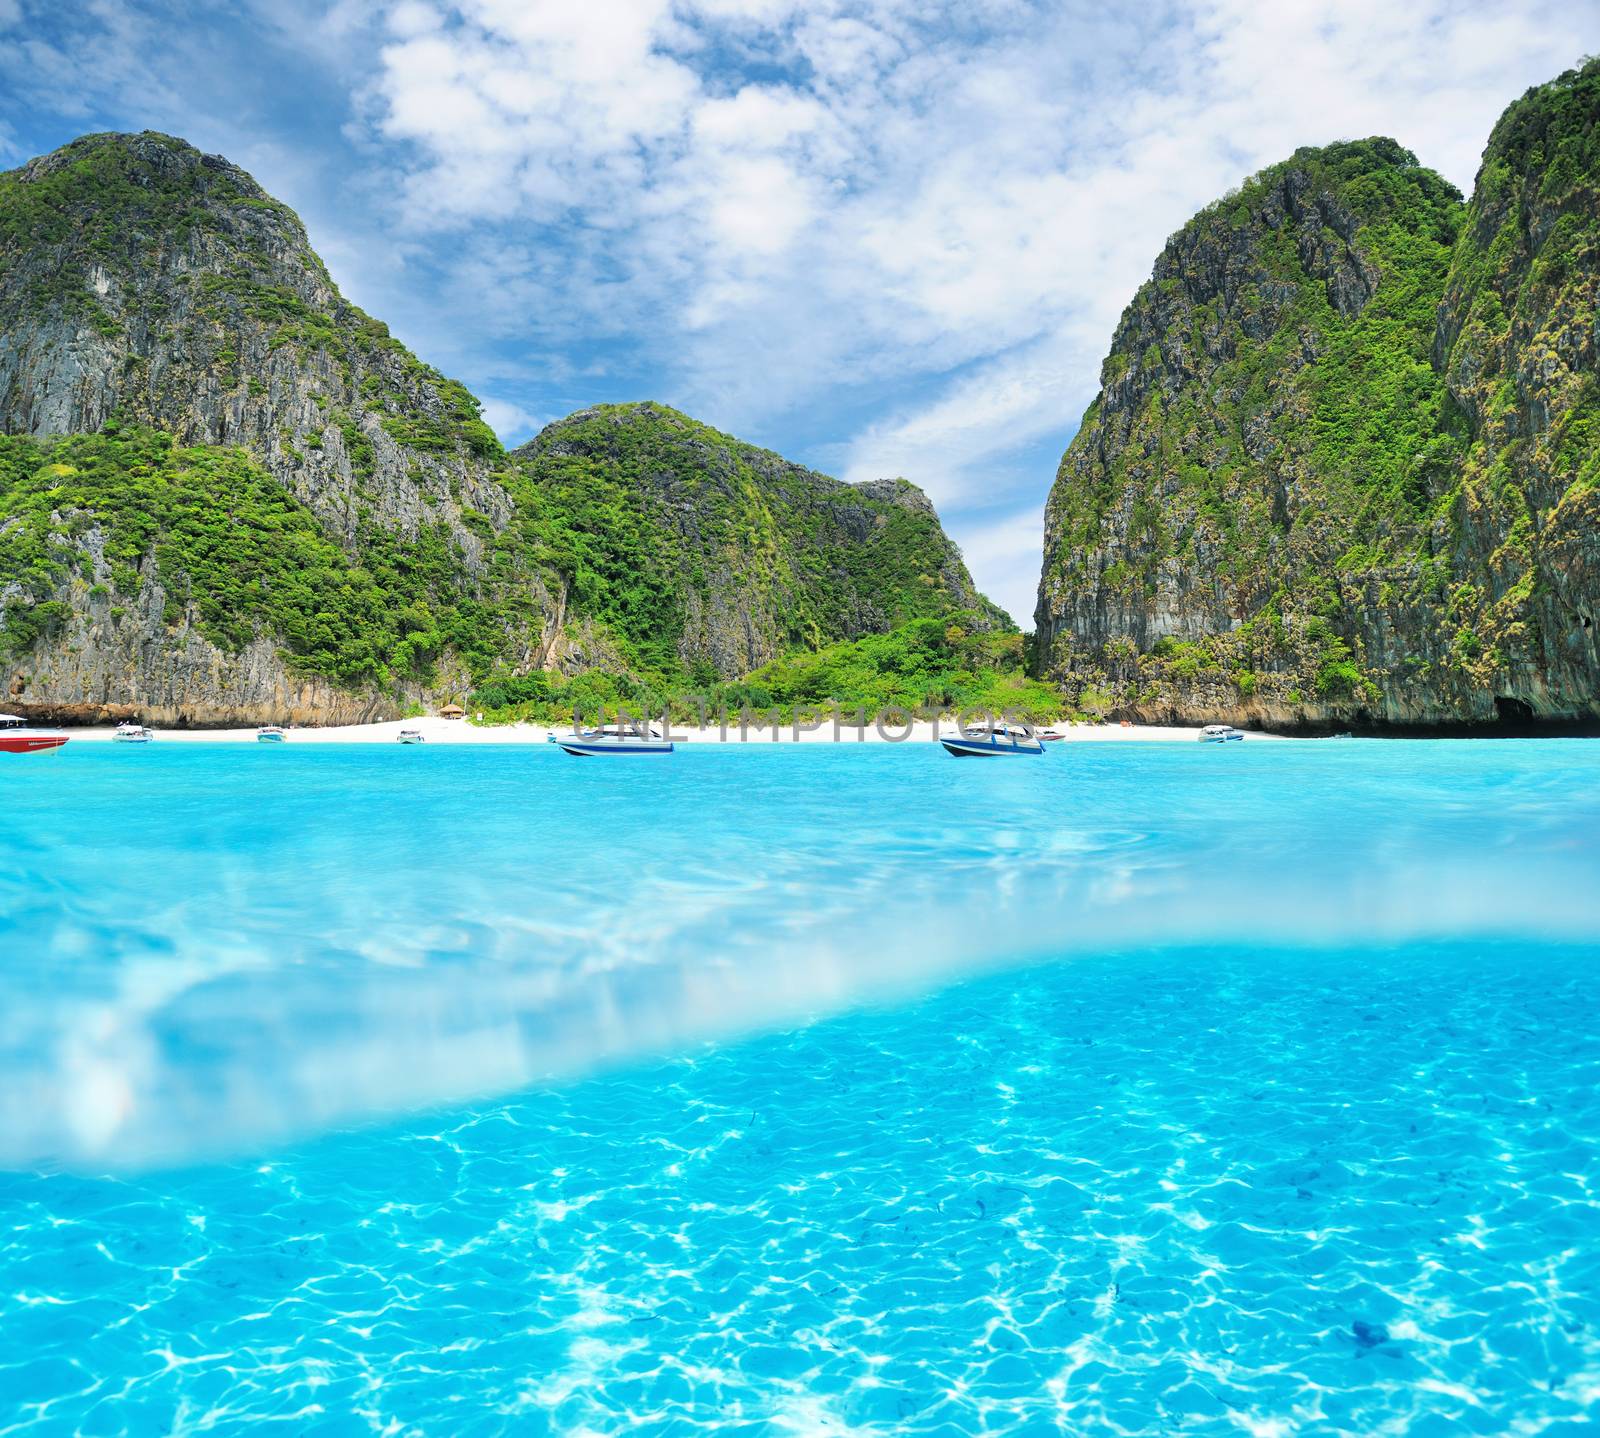 Beautiful lagoon at  Phi Phi Ley island with white sand bottom underwater and above water split view